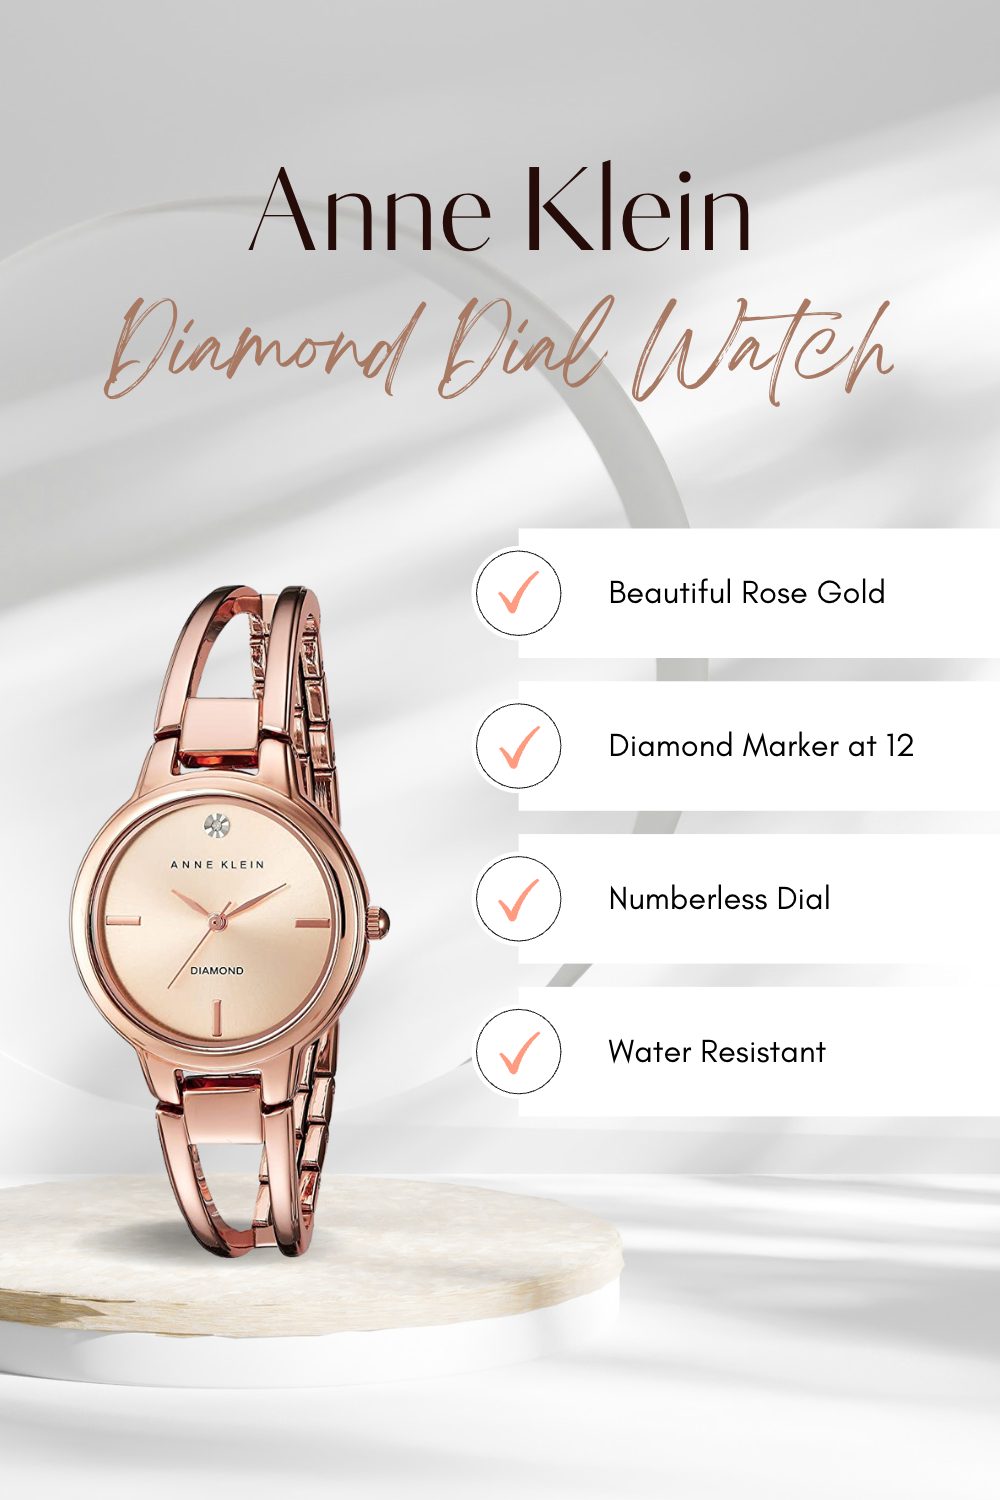 Anne Klein Rose Gold Watch is the Perfect Gift for Christmas!